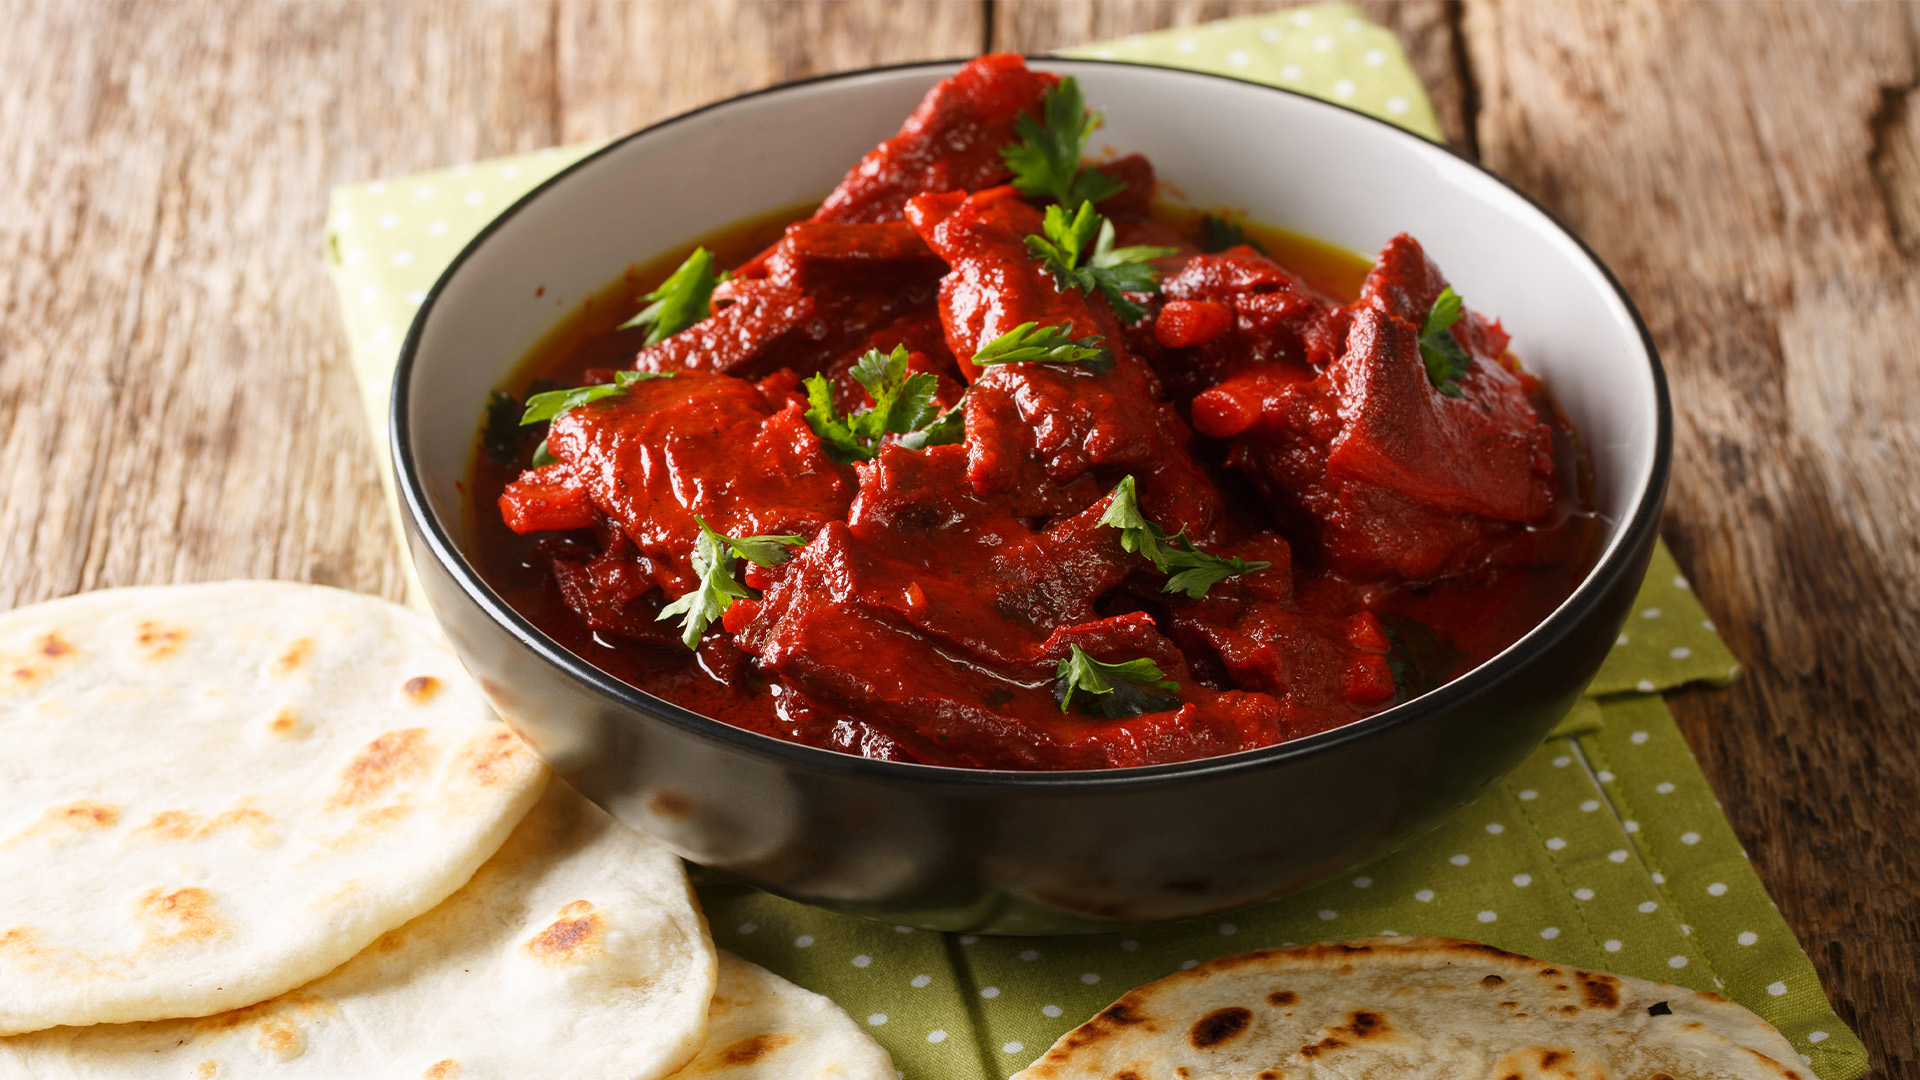 A hearty bowl of Rajasthani laal maas is a must-try for meat-lovers exploring the culinary treats of India's Golden Triangle – Luxury Escapes